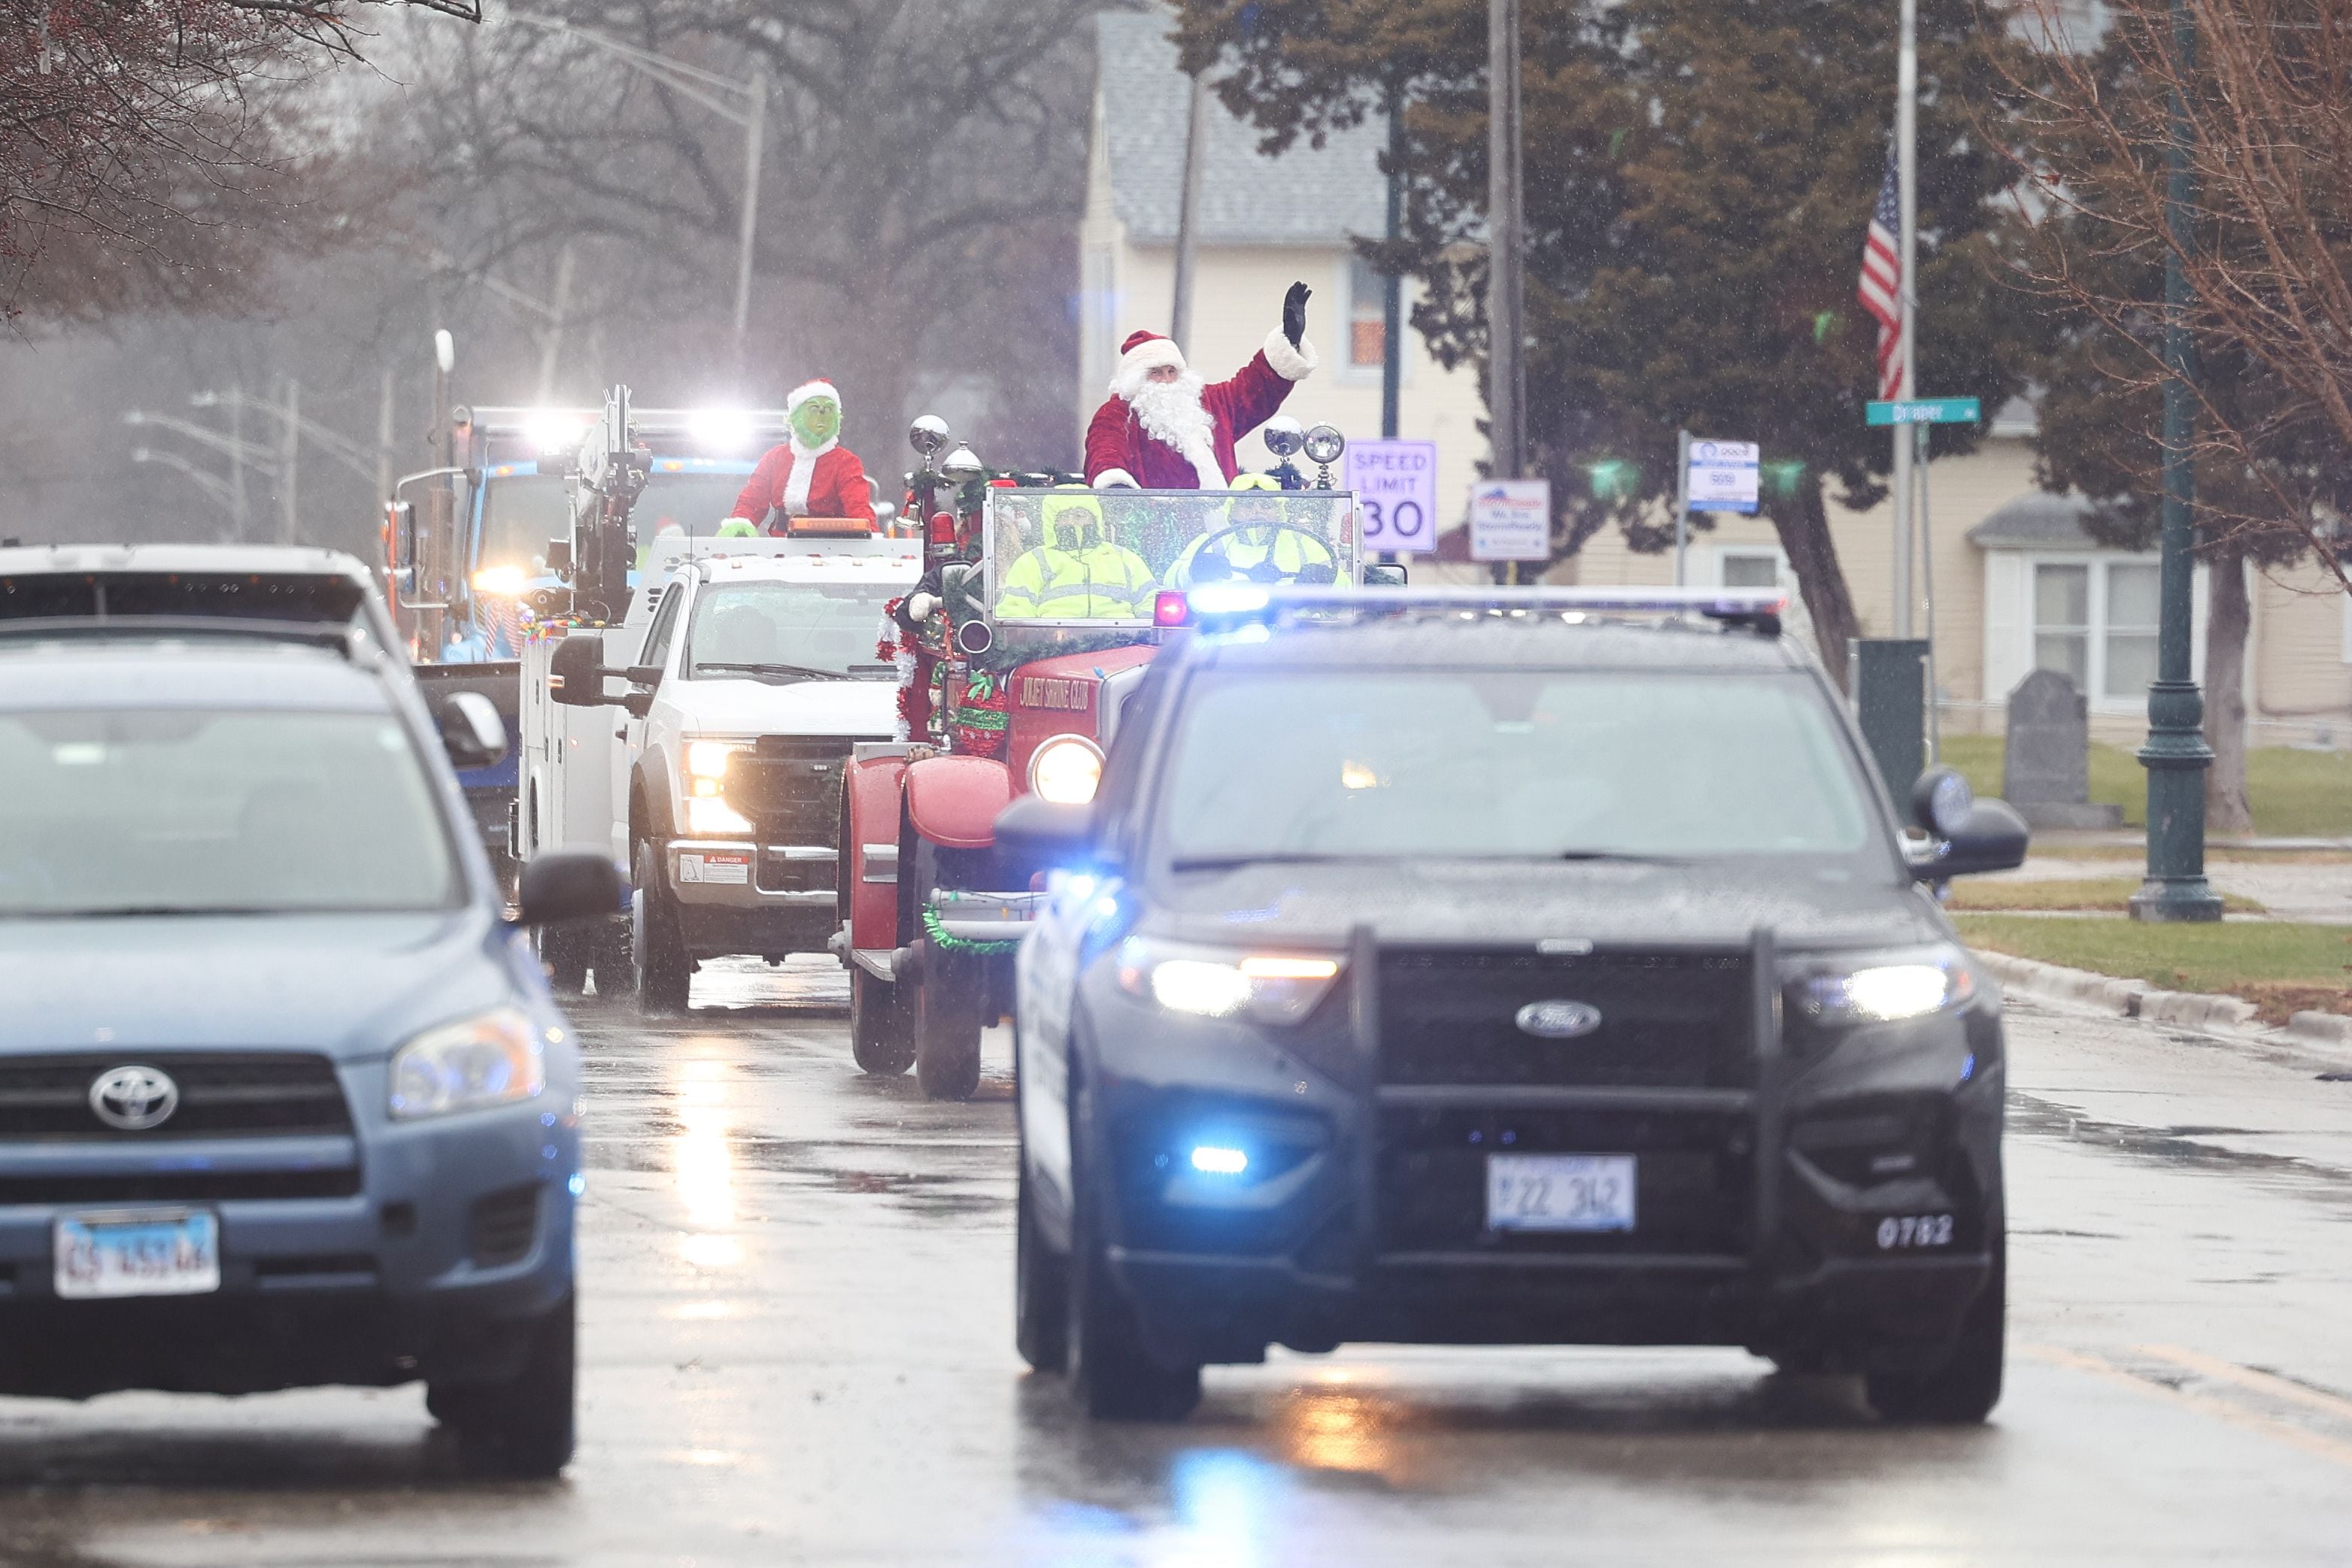 Santa gets a police escort as he passes through Joliet on his way to the North Pole to get ready for Christmas Eve on Saturday, Dec.16th in Joliet.